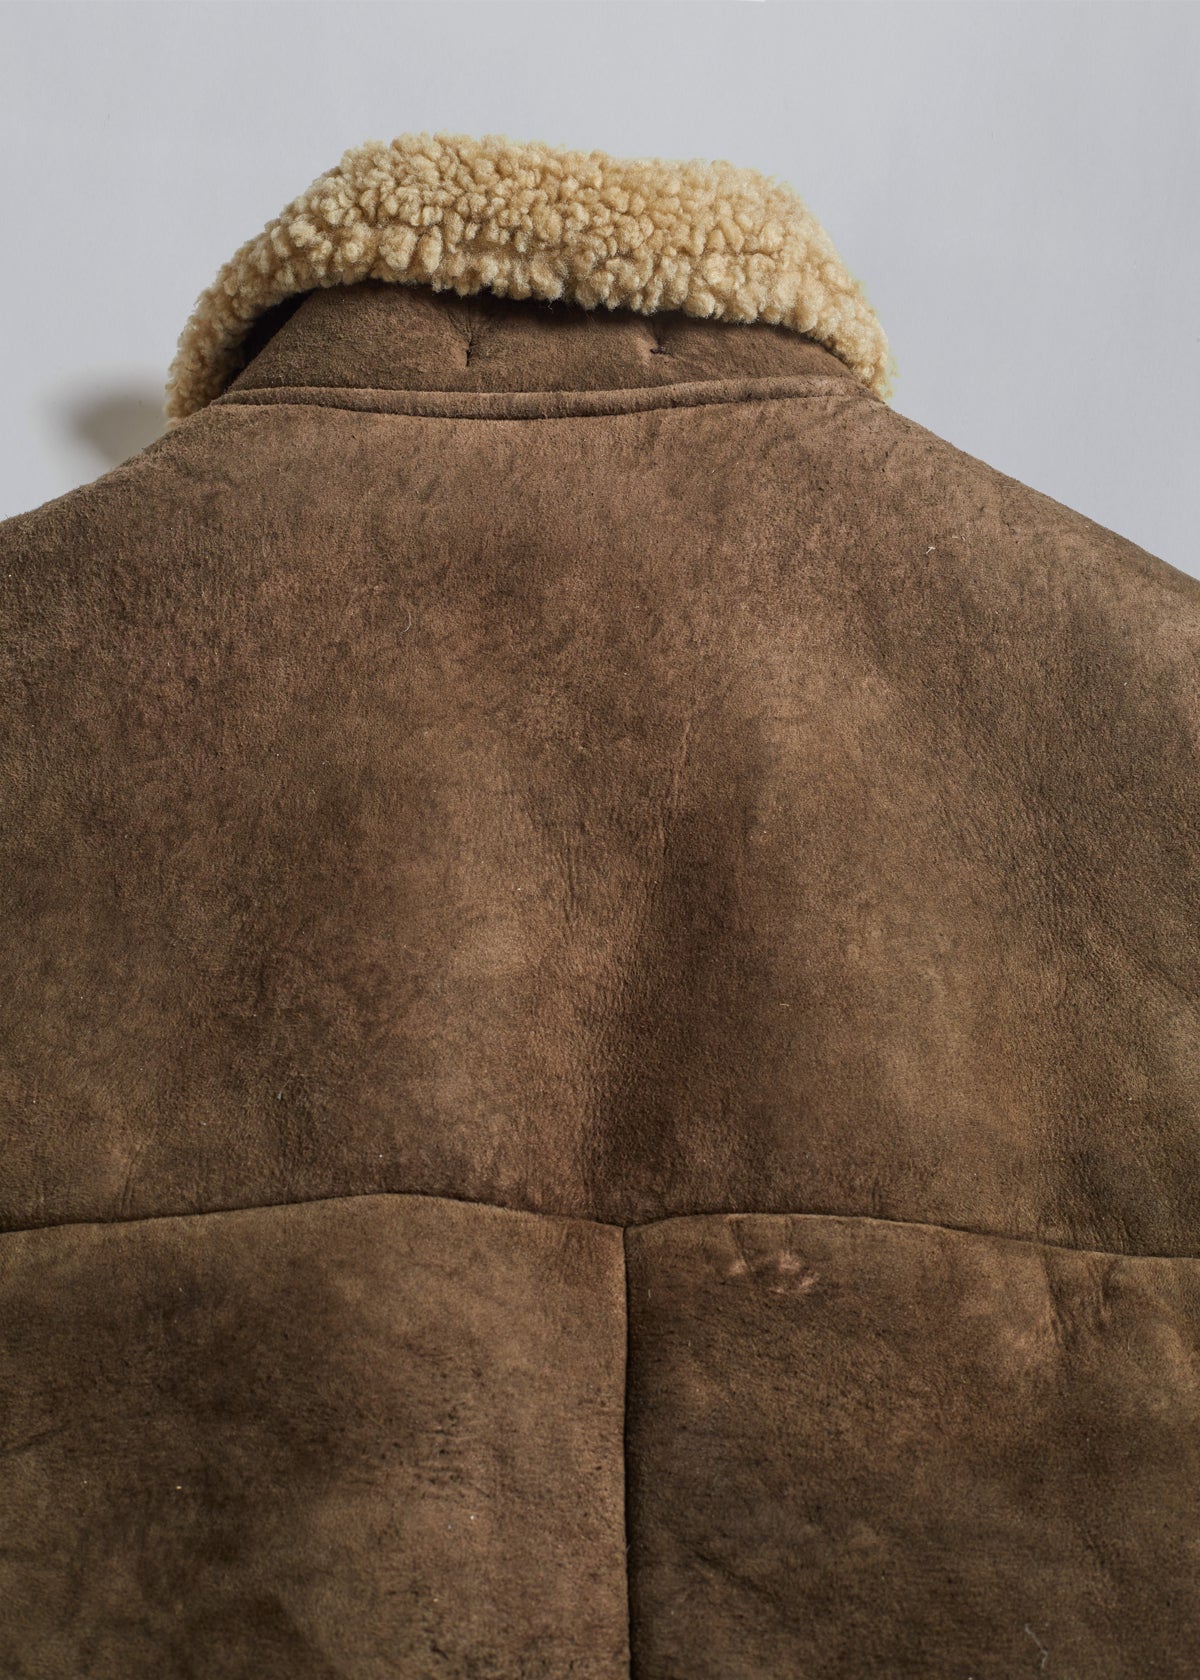 Shearling Coat AW1994 - X-Large - The Archivist Store